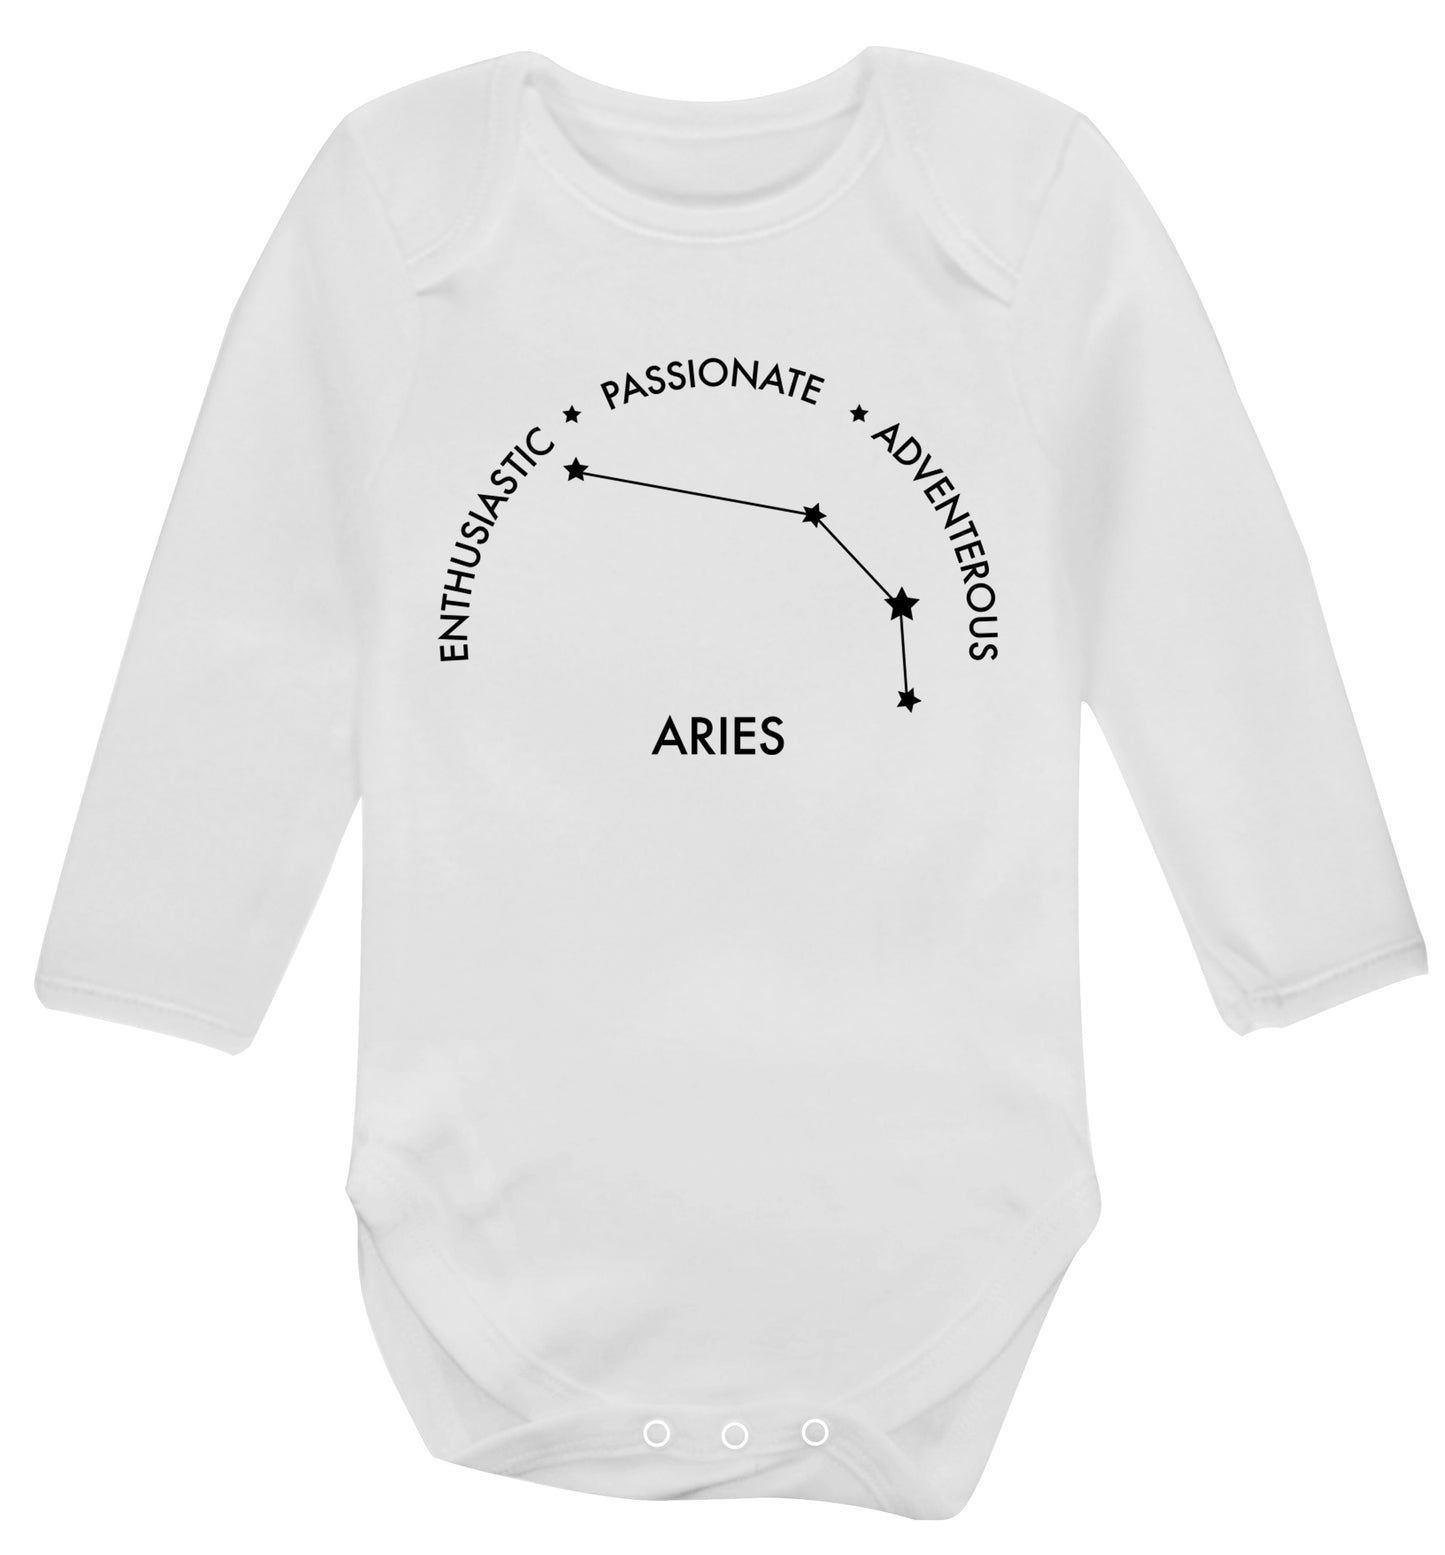 Aries enthusiastic | passionate | adventerous Baby Vest long sleeved white 6-12 months